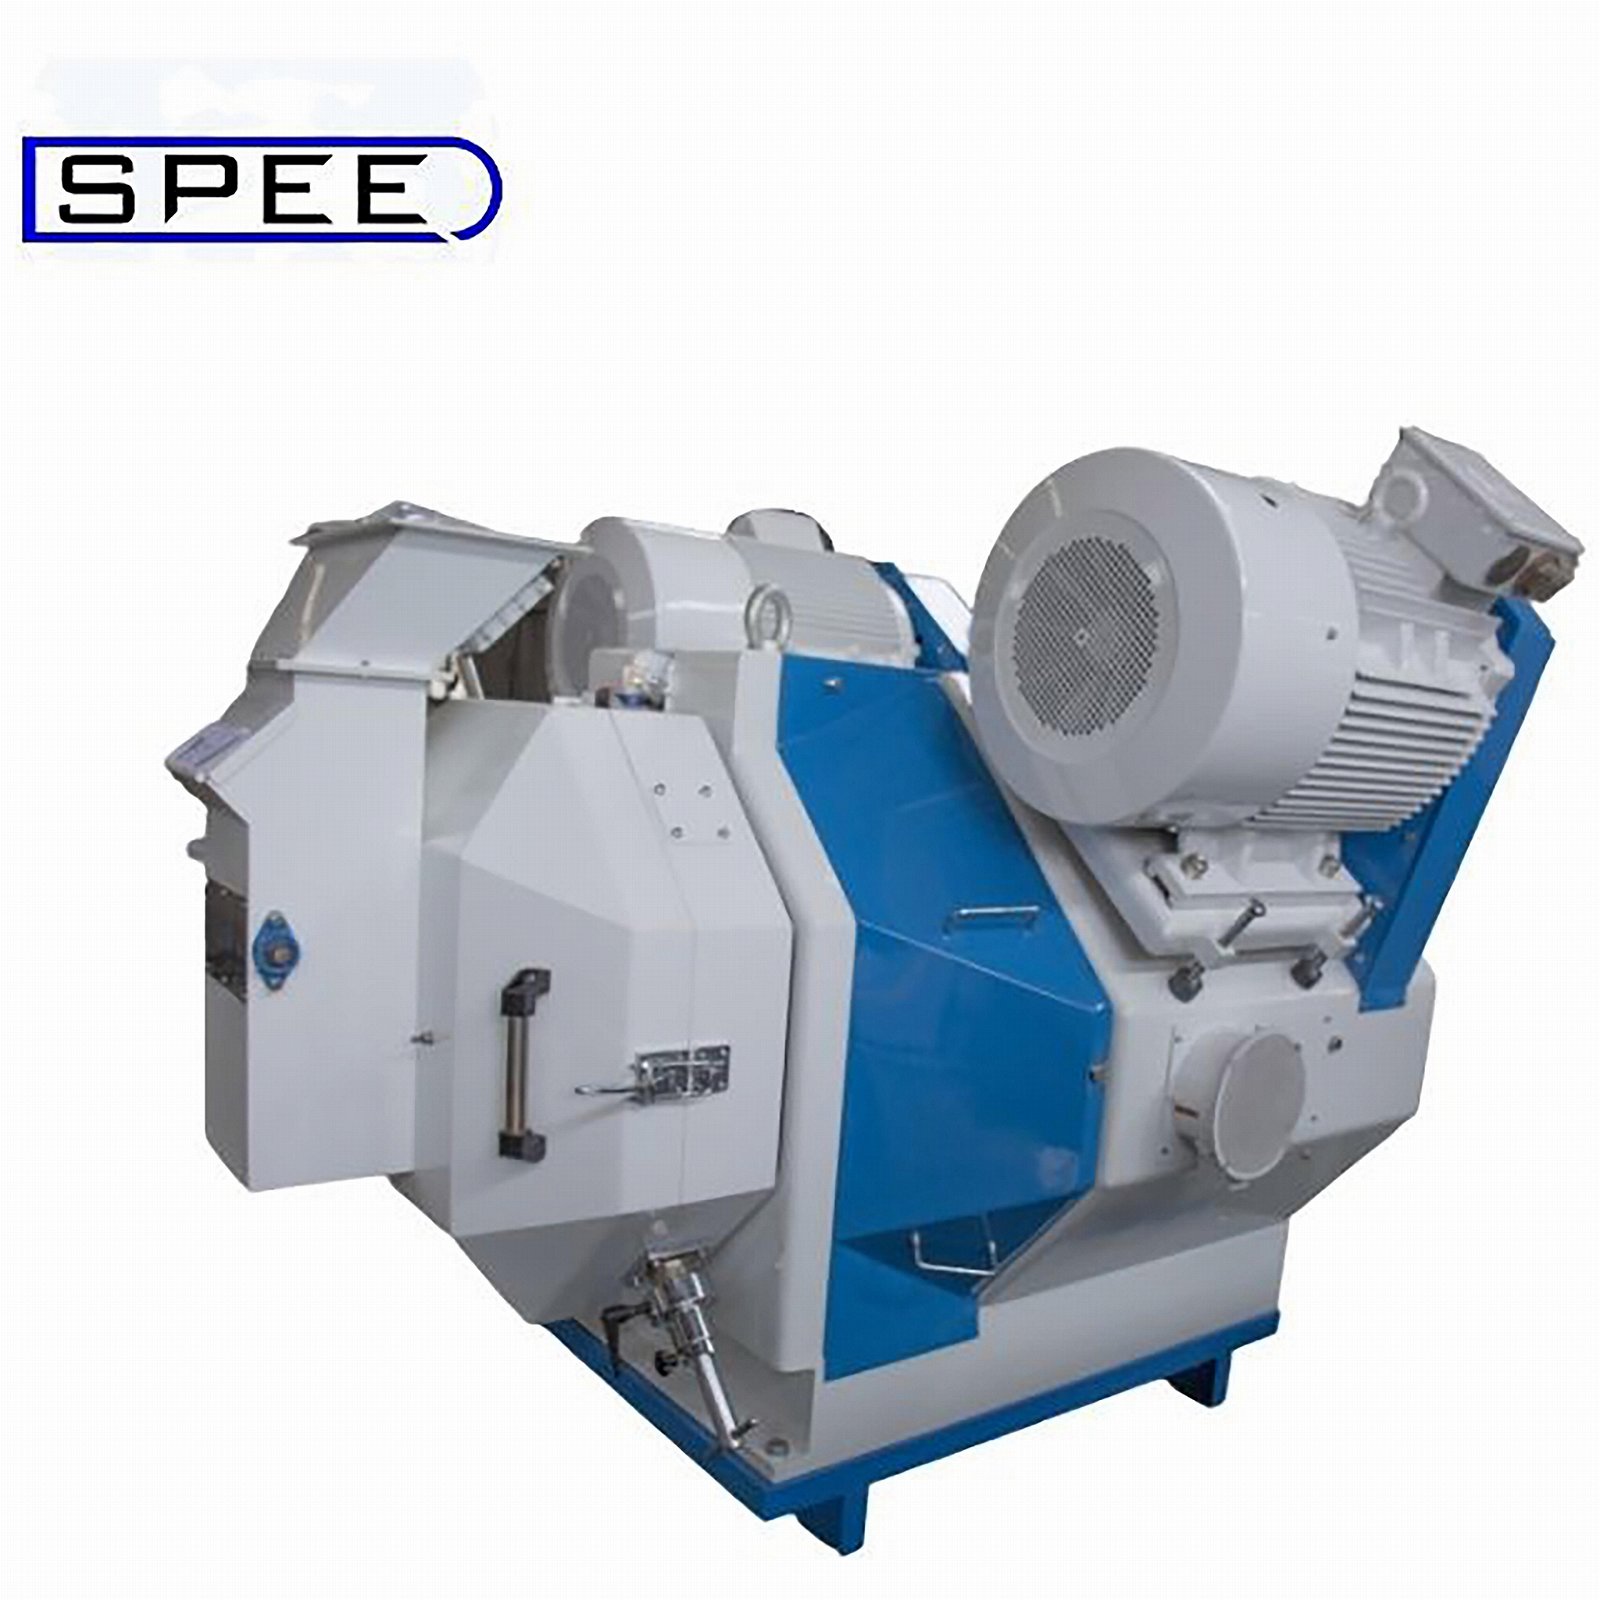 Customized product-Livestock and poultry pellet mill 3